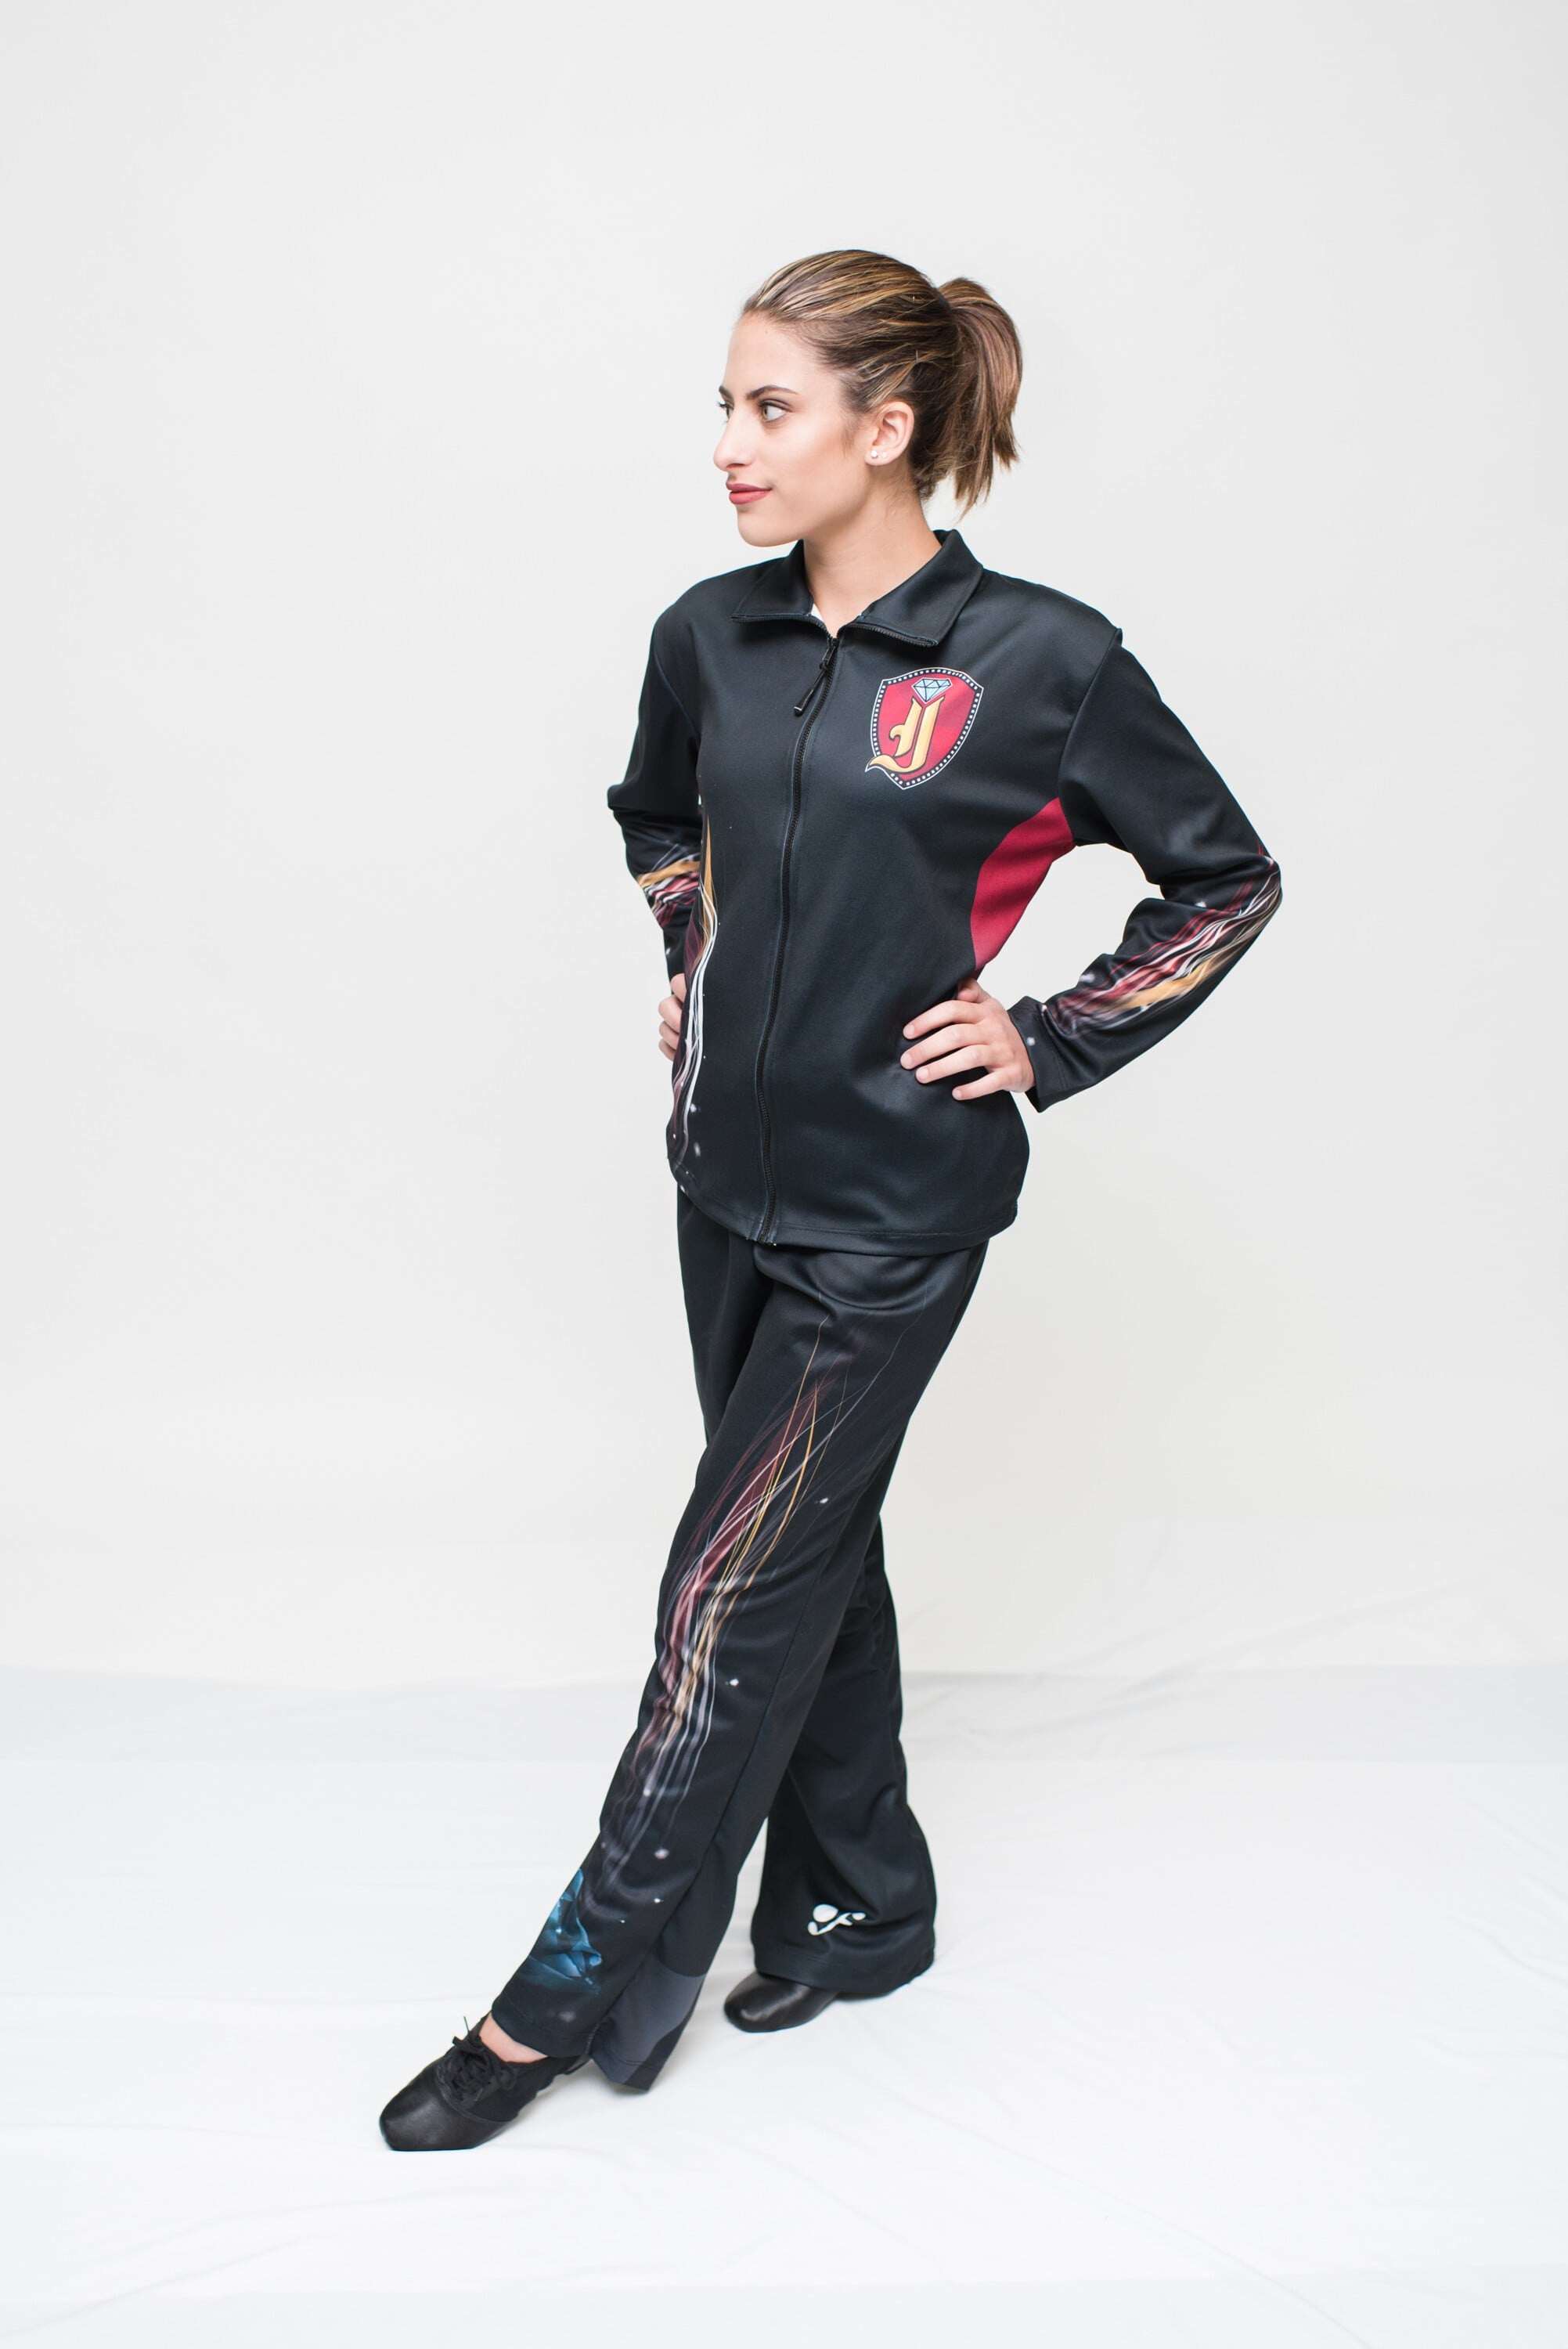 Indigo Black with fine detail streamer graphics on legs and arms . Ballet /sublimation -custom